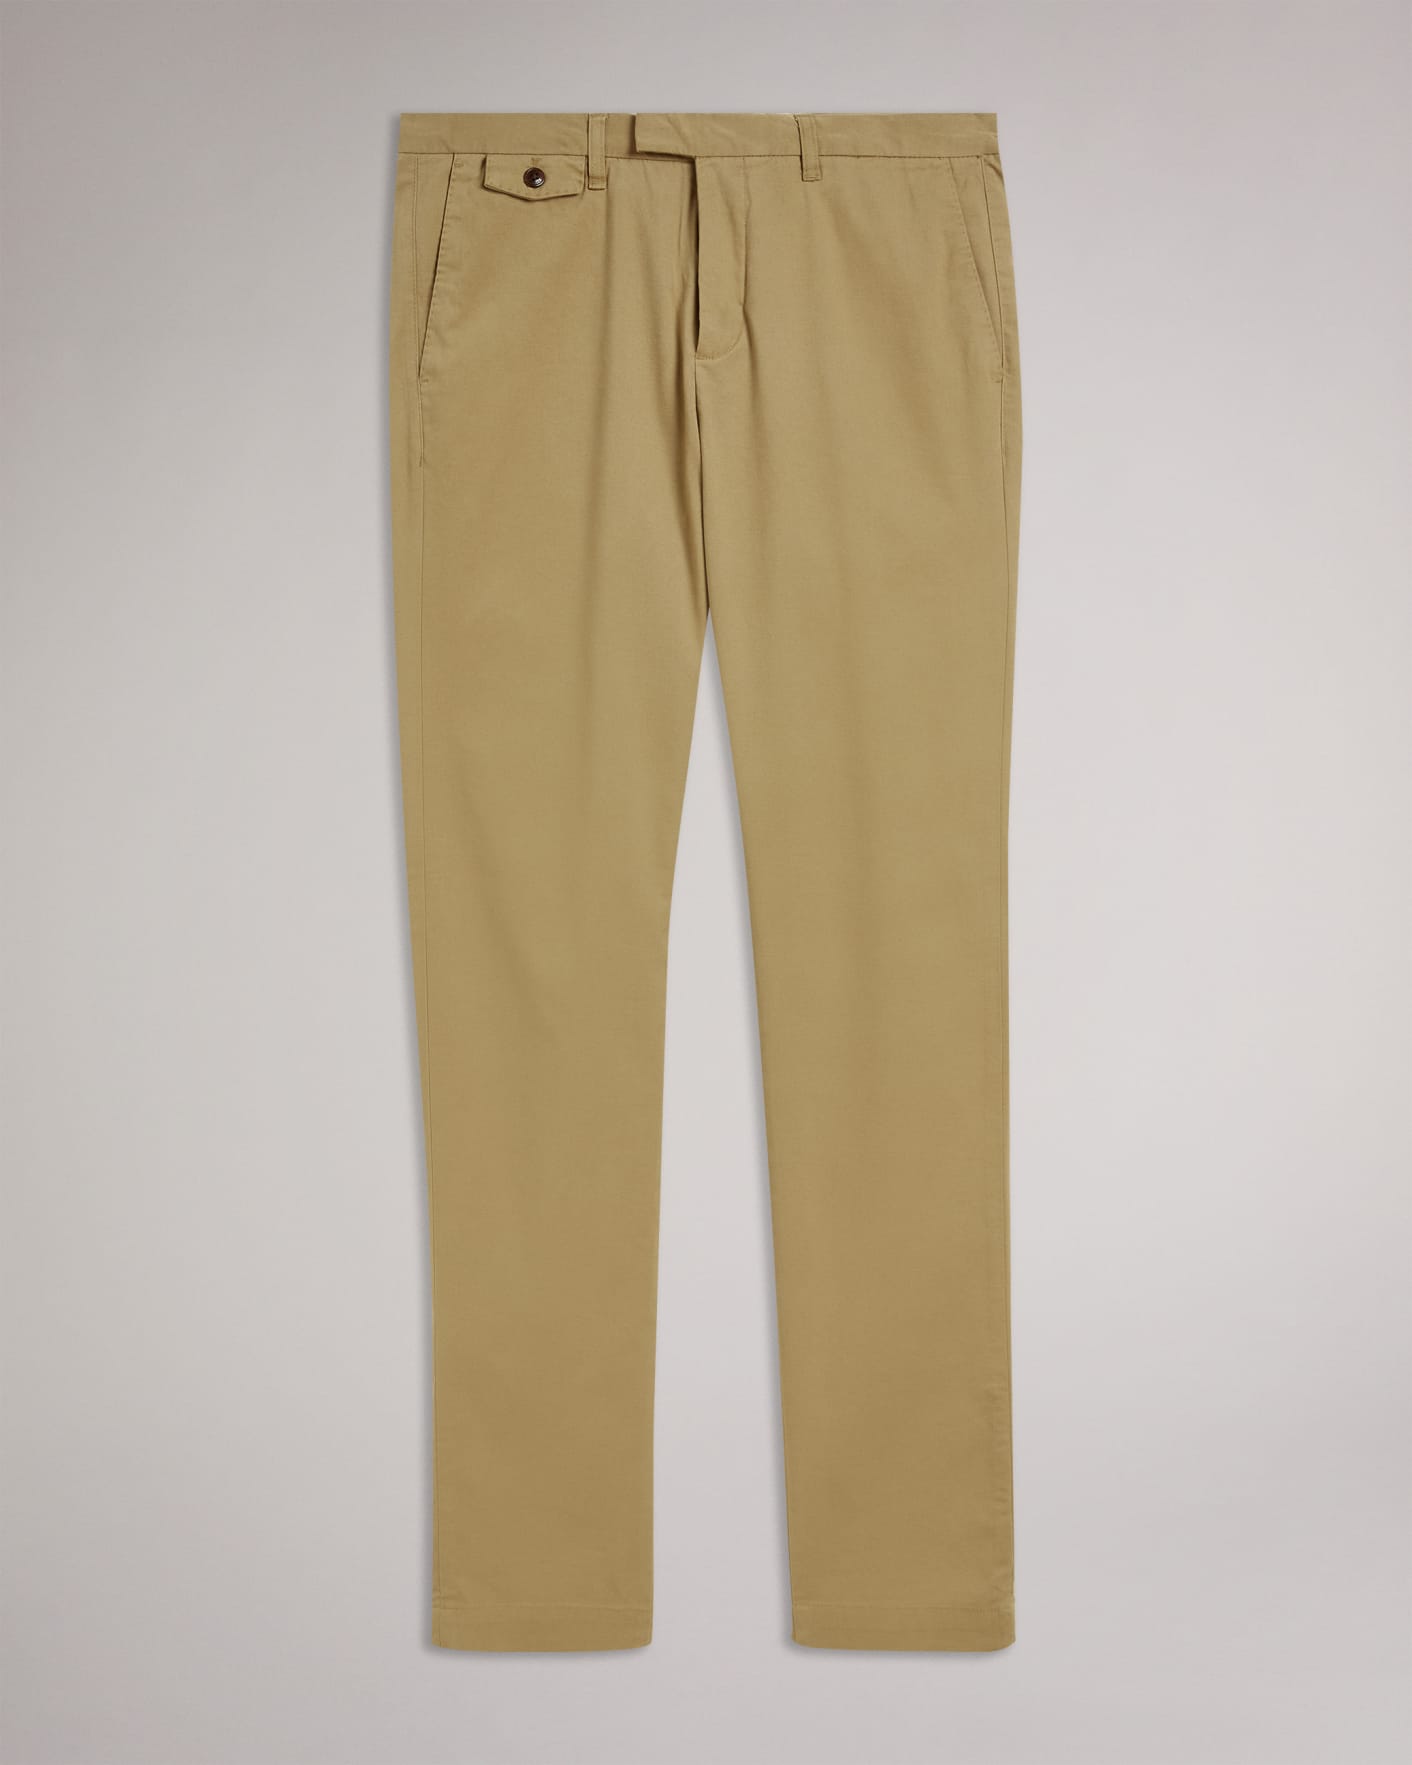 Tostado Chino Slim Fit Ted Baker